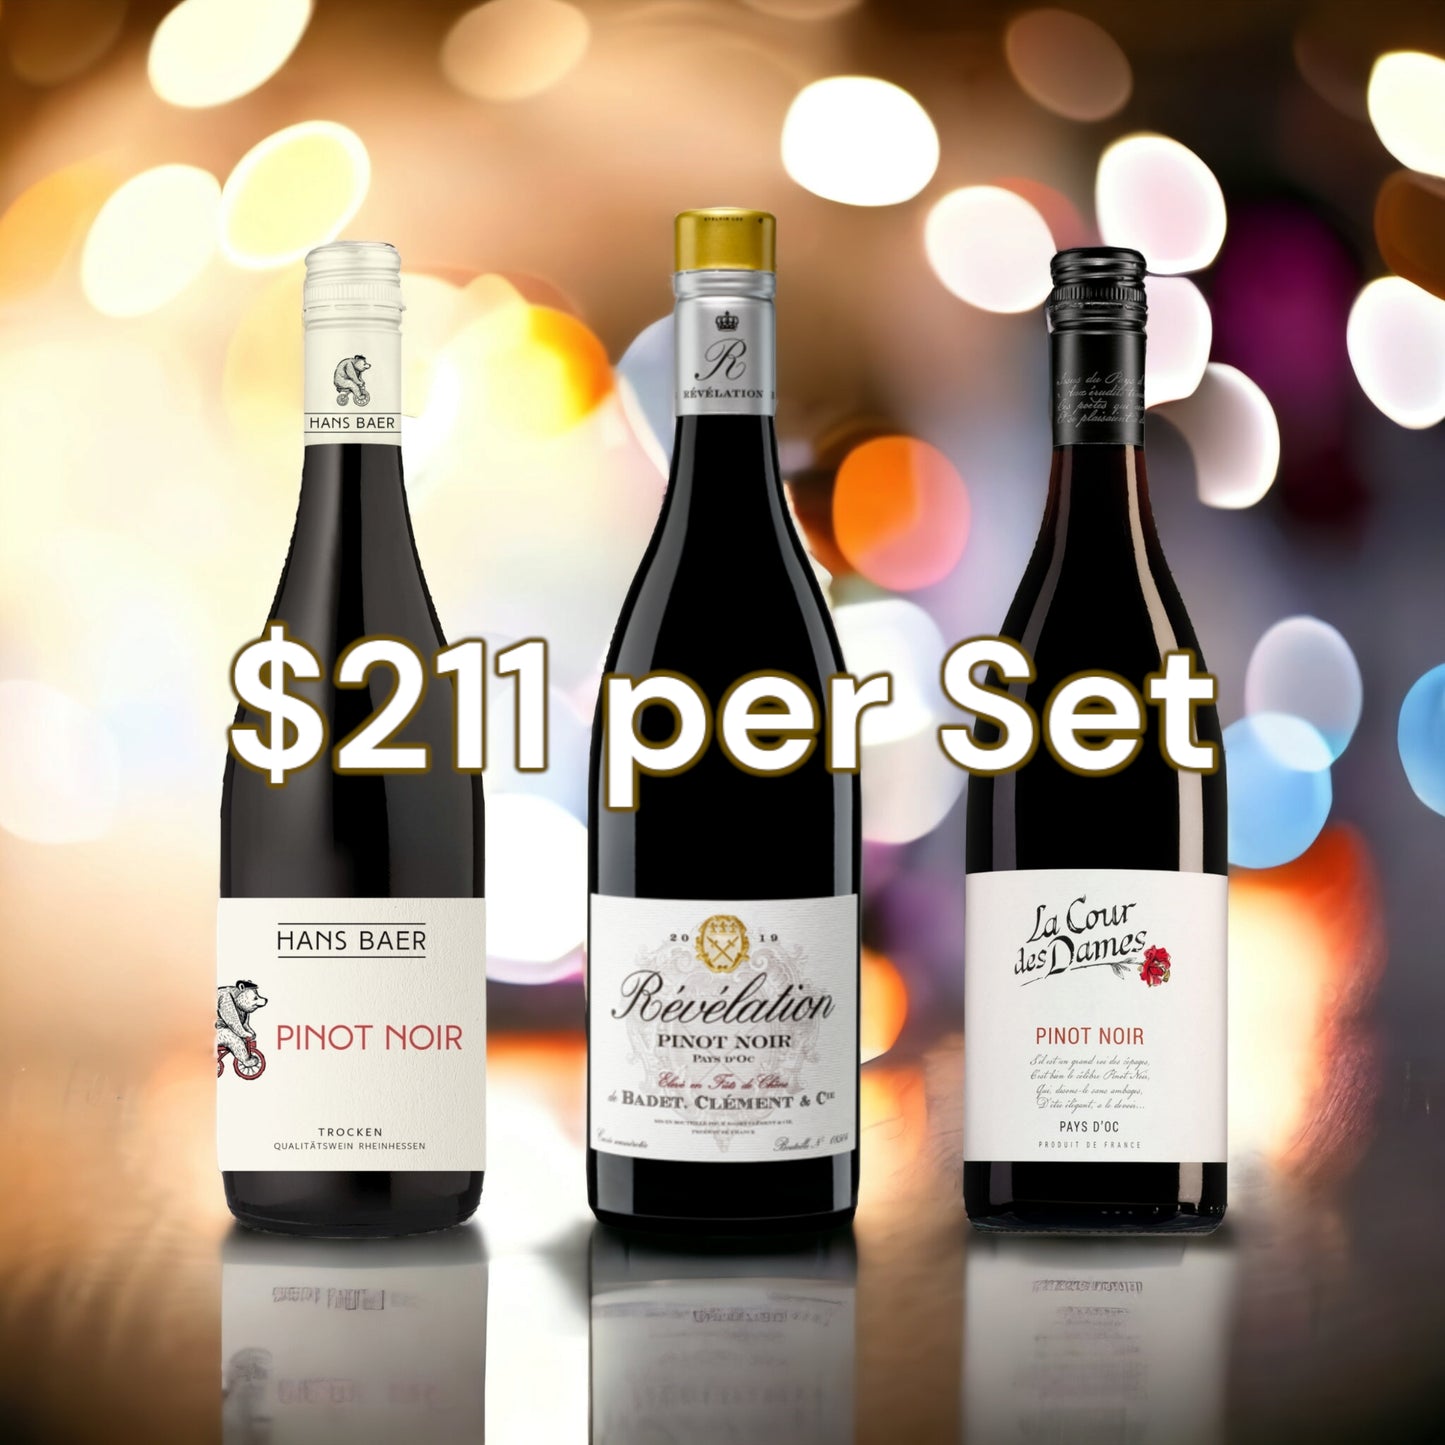 Badet Clement Pinot + La Cour des Dames Pinot + Hans Baer Pinot Red Wine Lillion Wine special offer